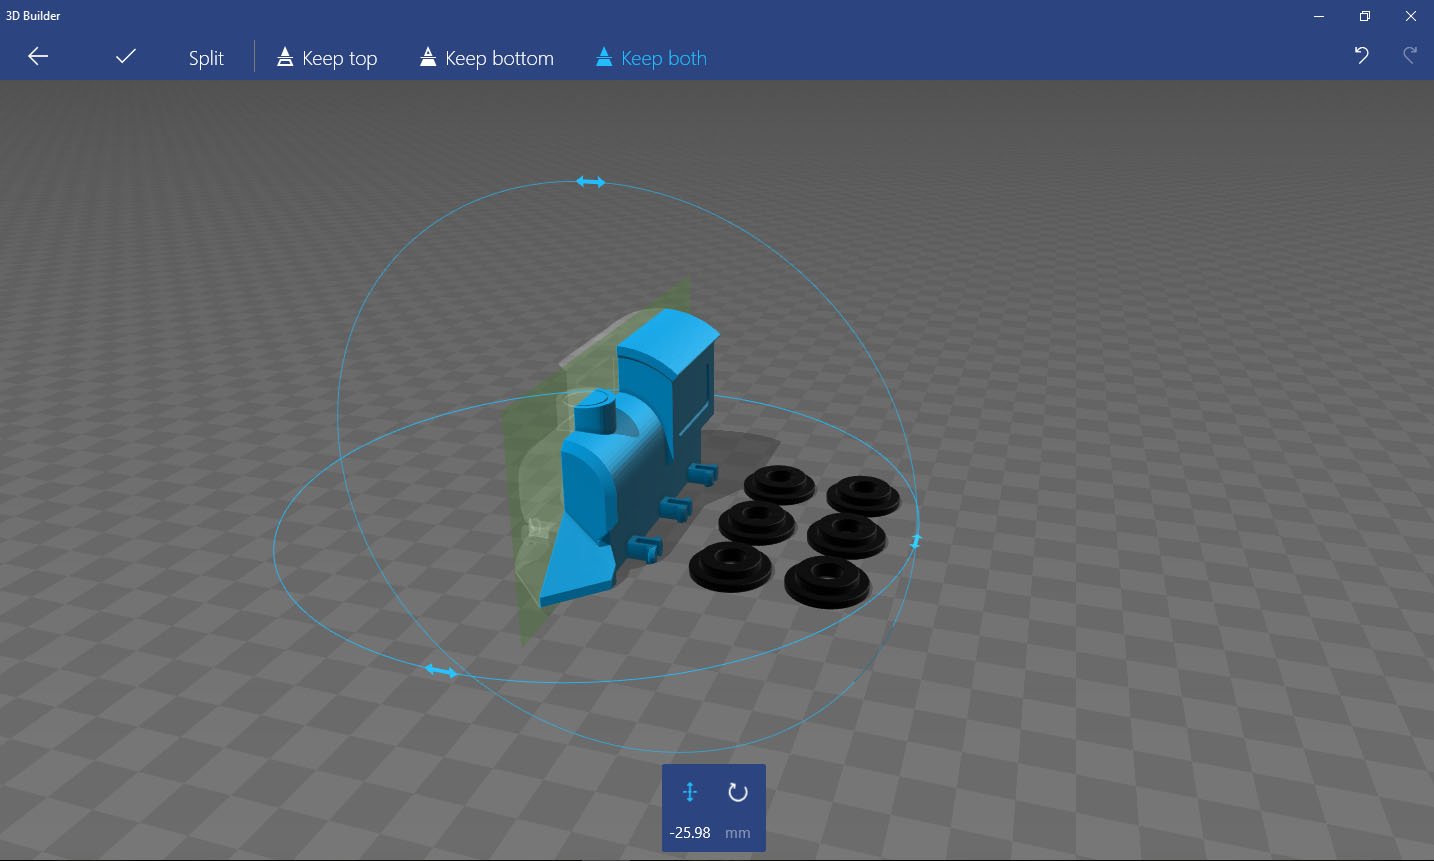 How to use 3D Builder on Windows 10 | Windows Central
